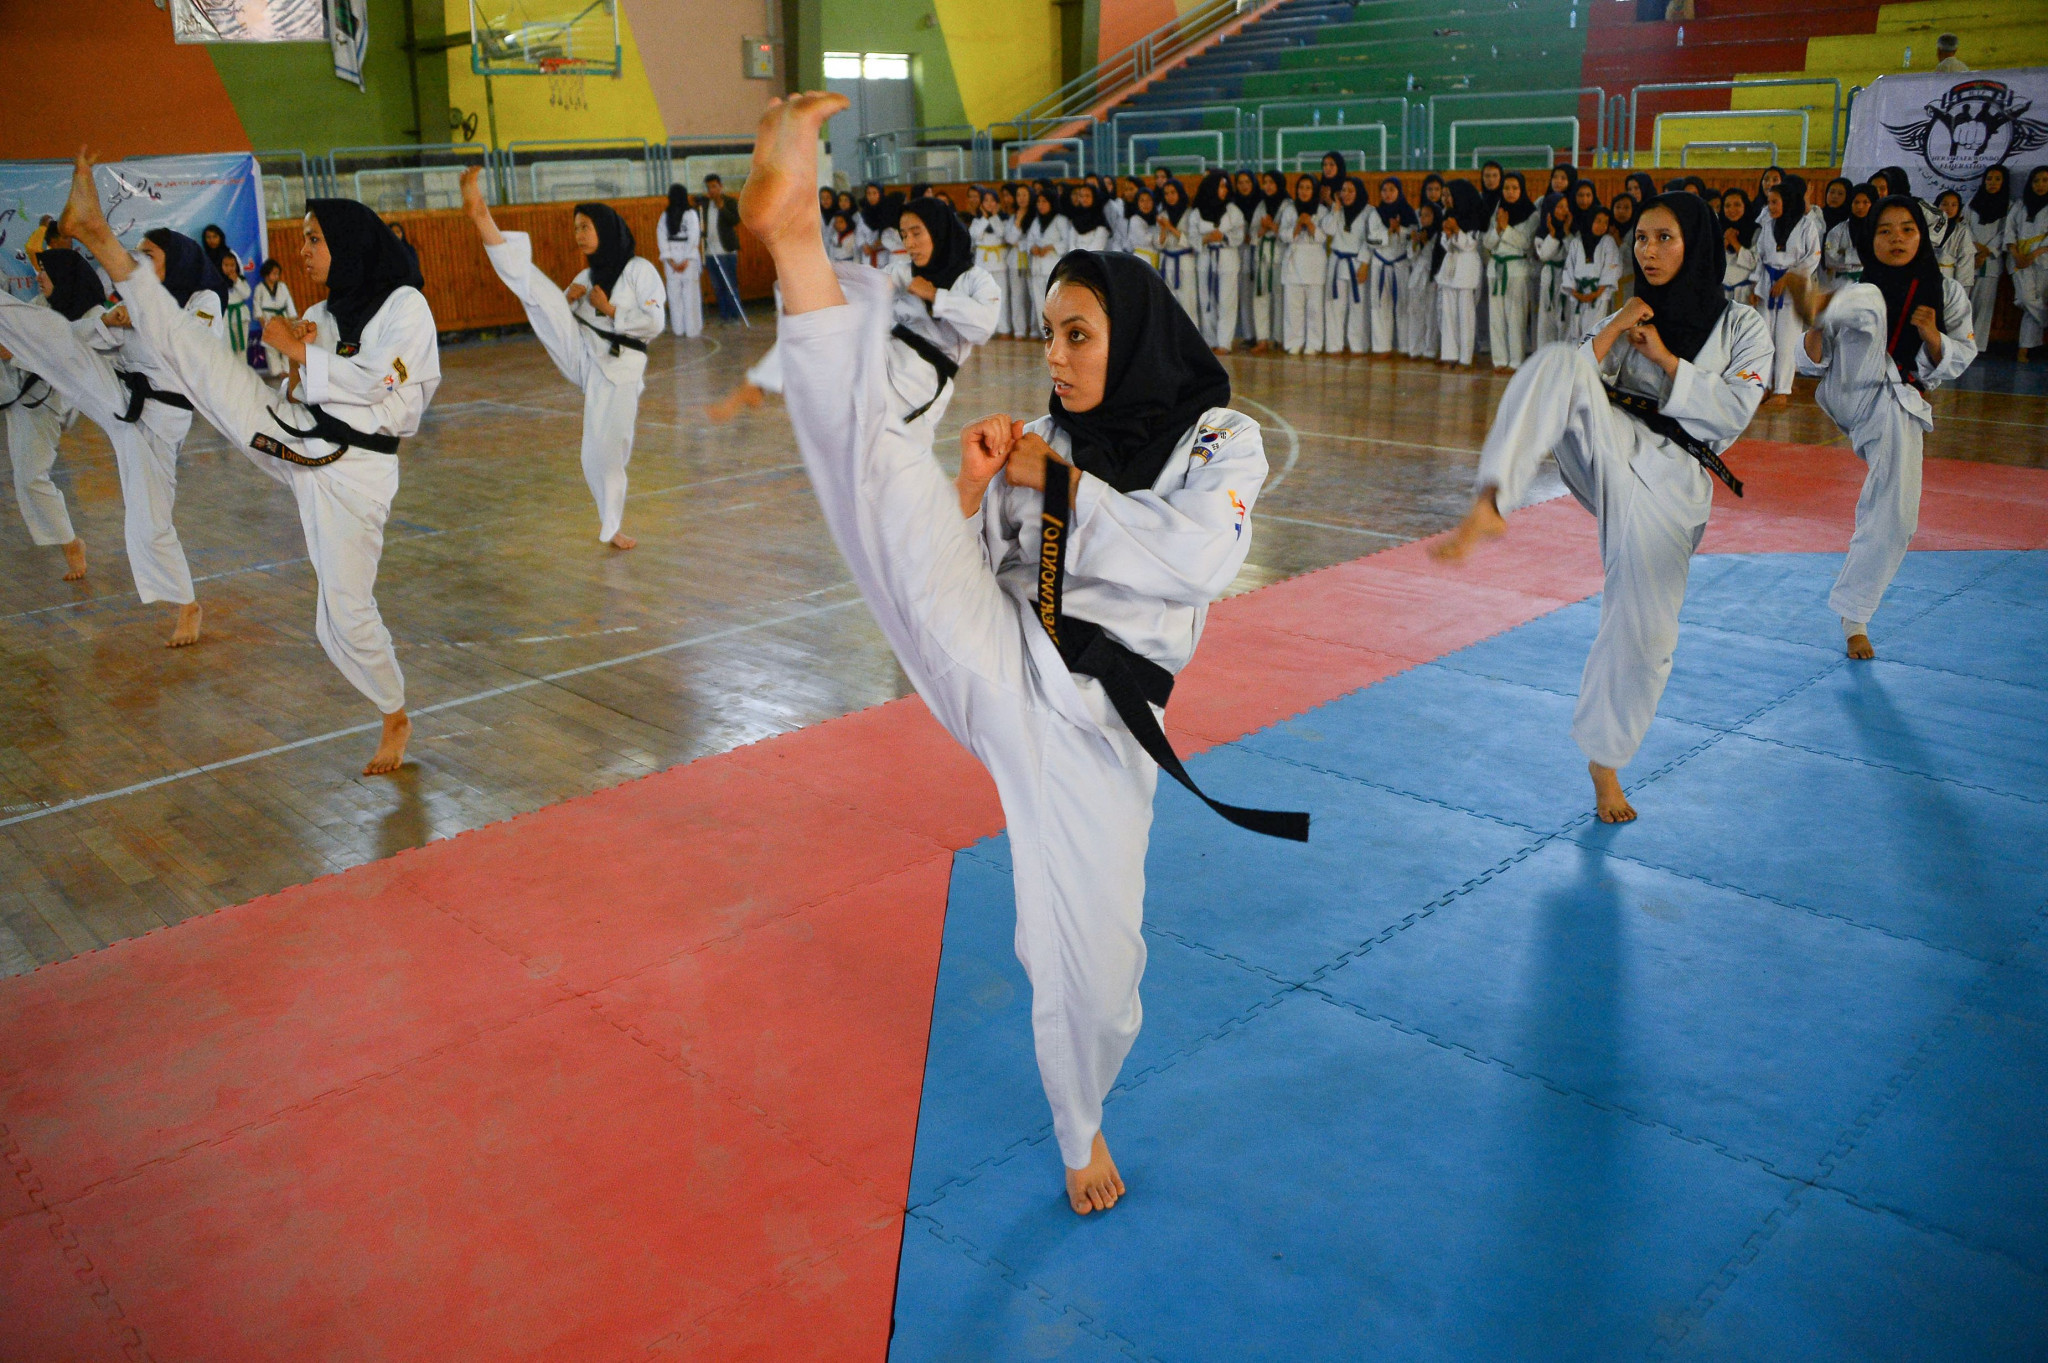 Afghan women take part in a taekwondo training session at a gym in Herat ©Getty Images